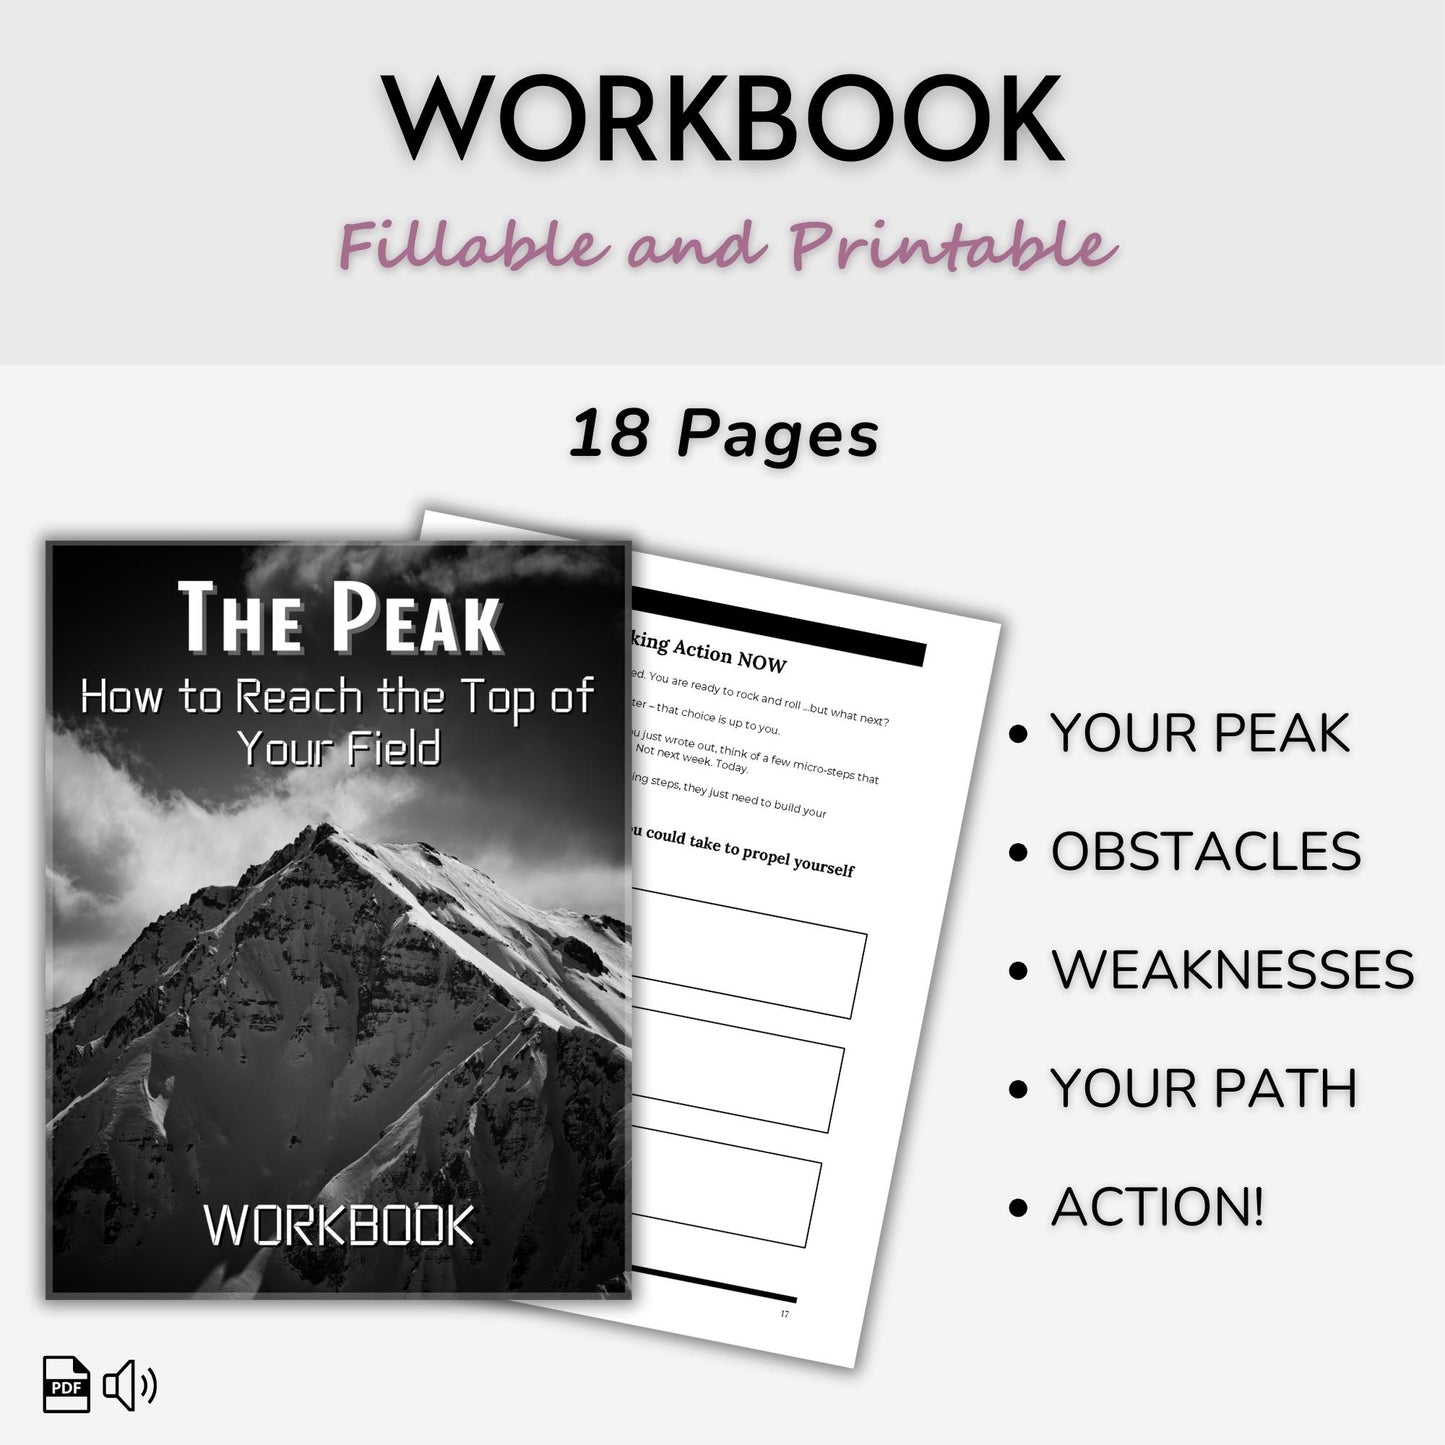 The Peak: How To Reach The Top Of Your Field